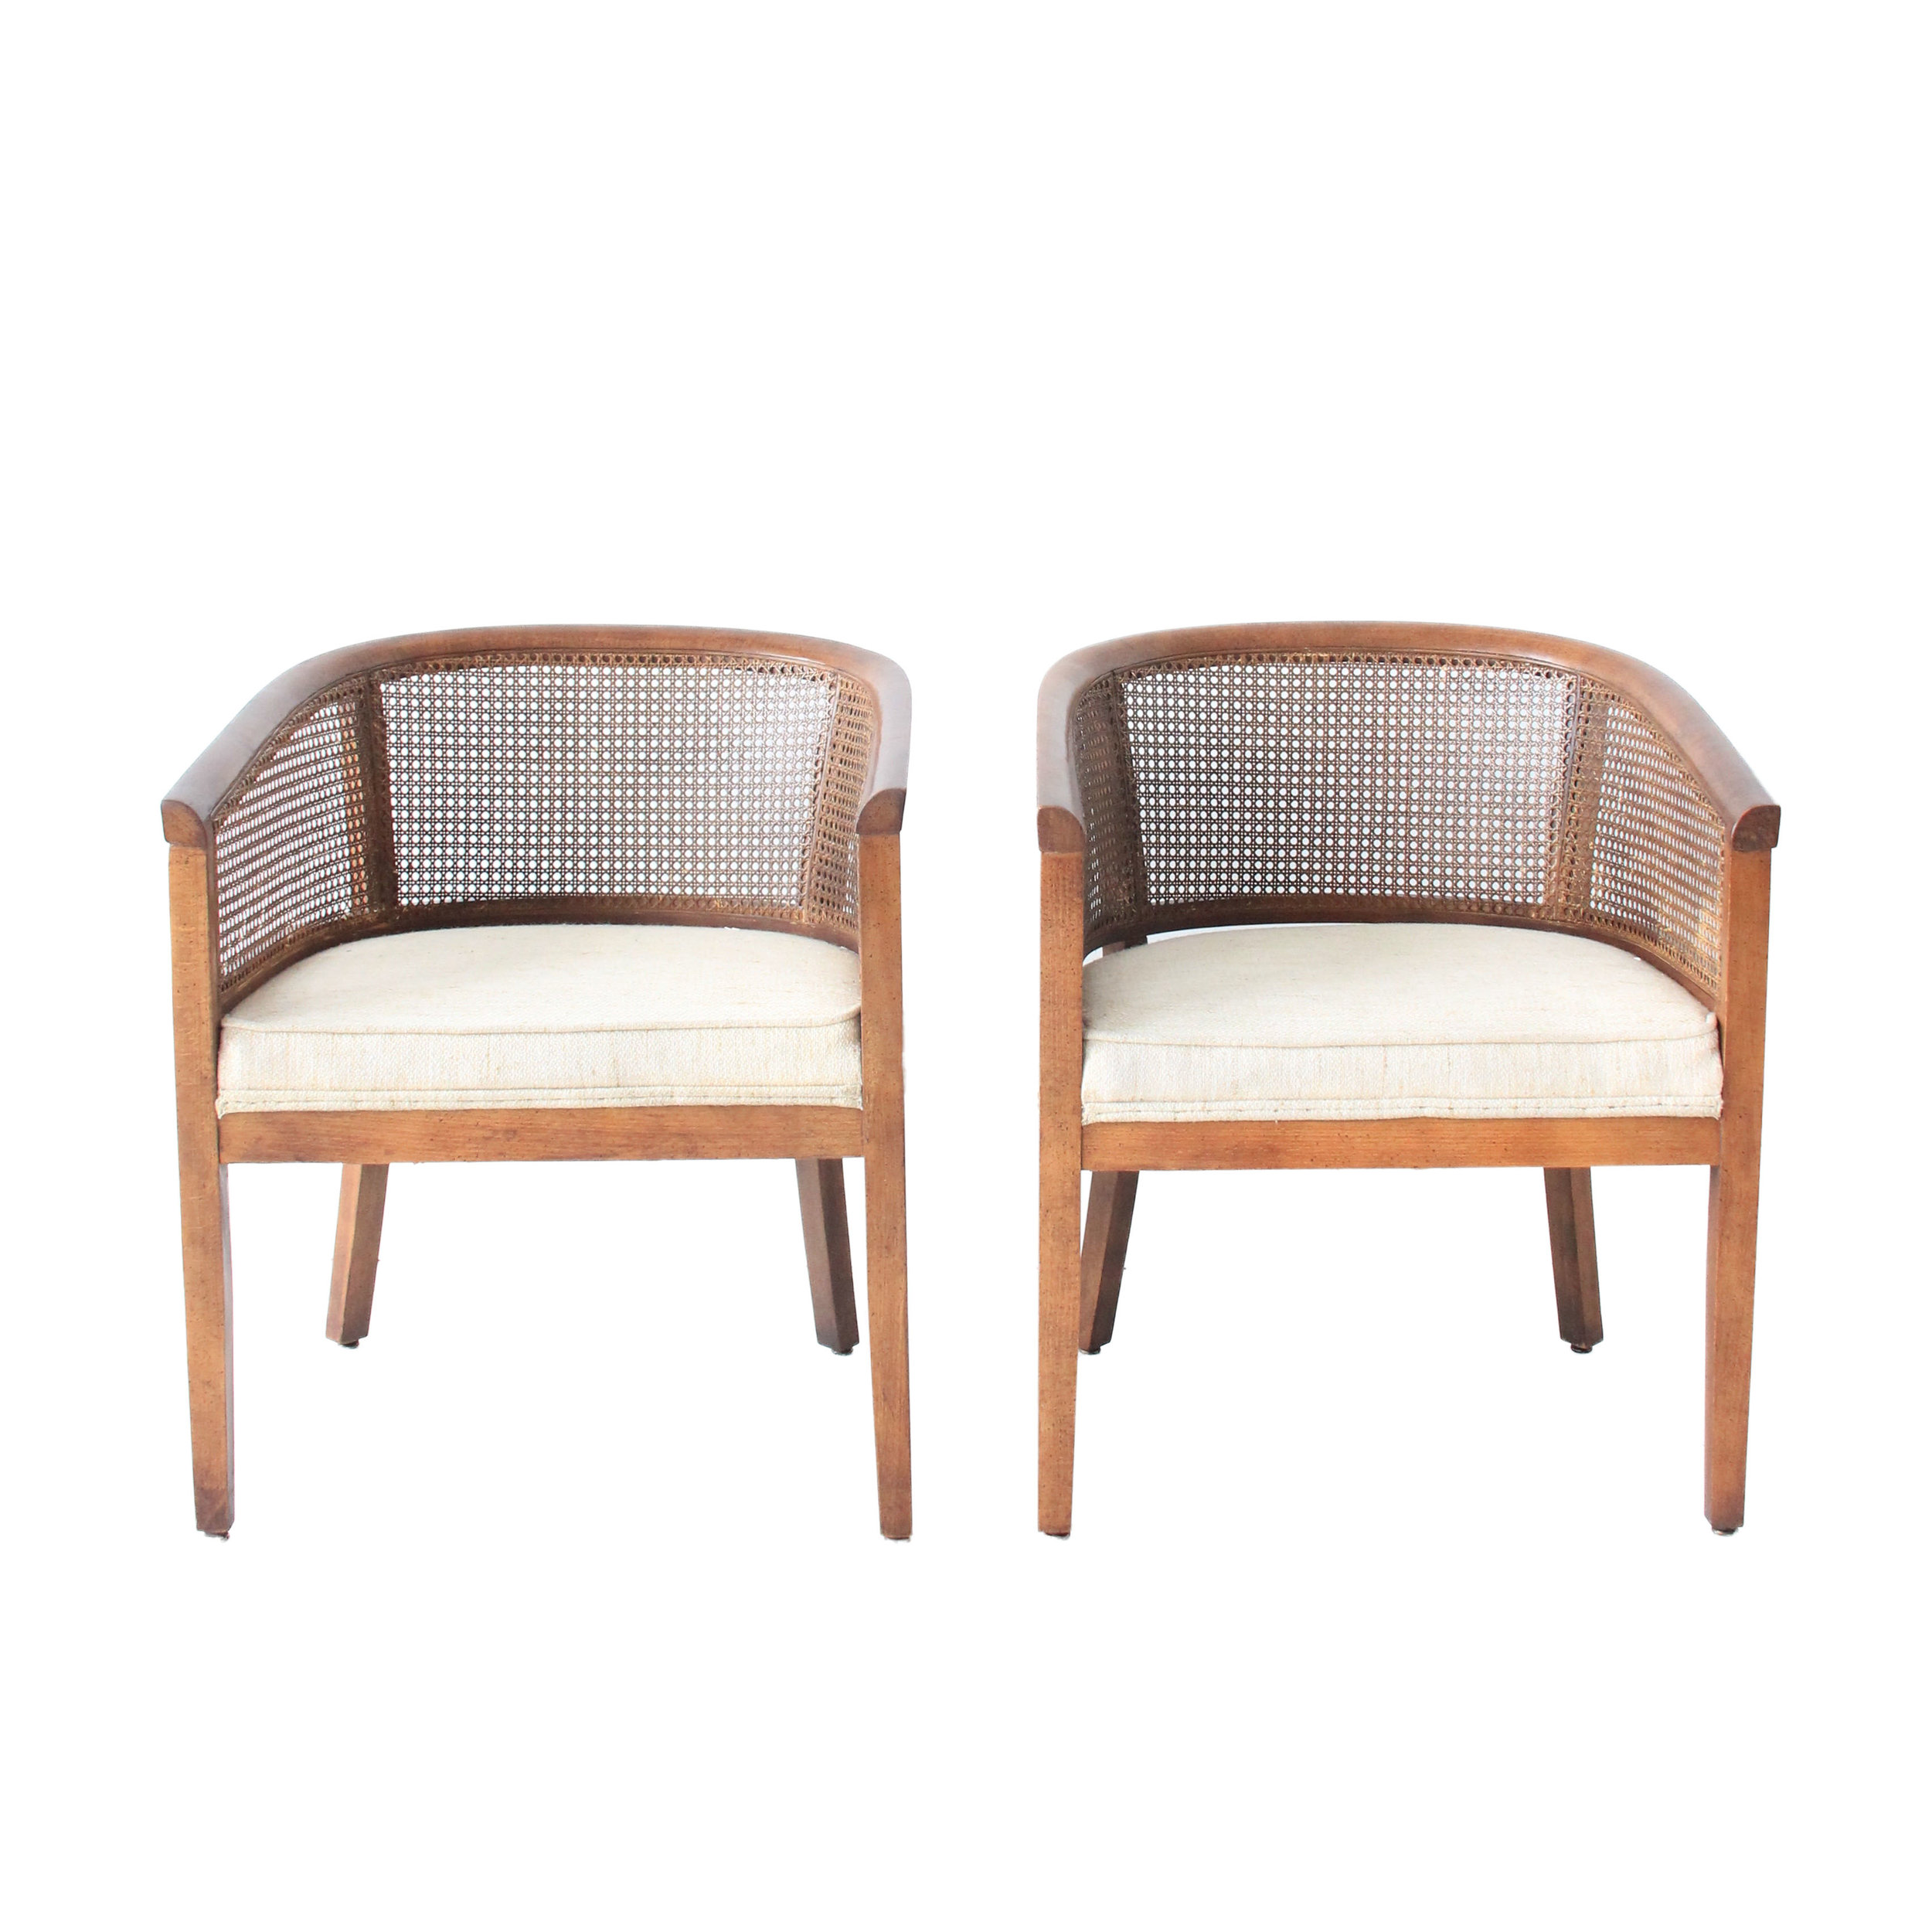 Vintage Cane Accent Chairs